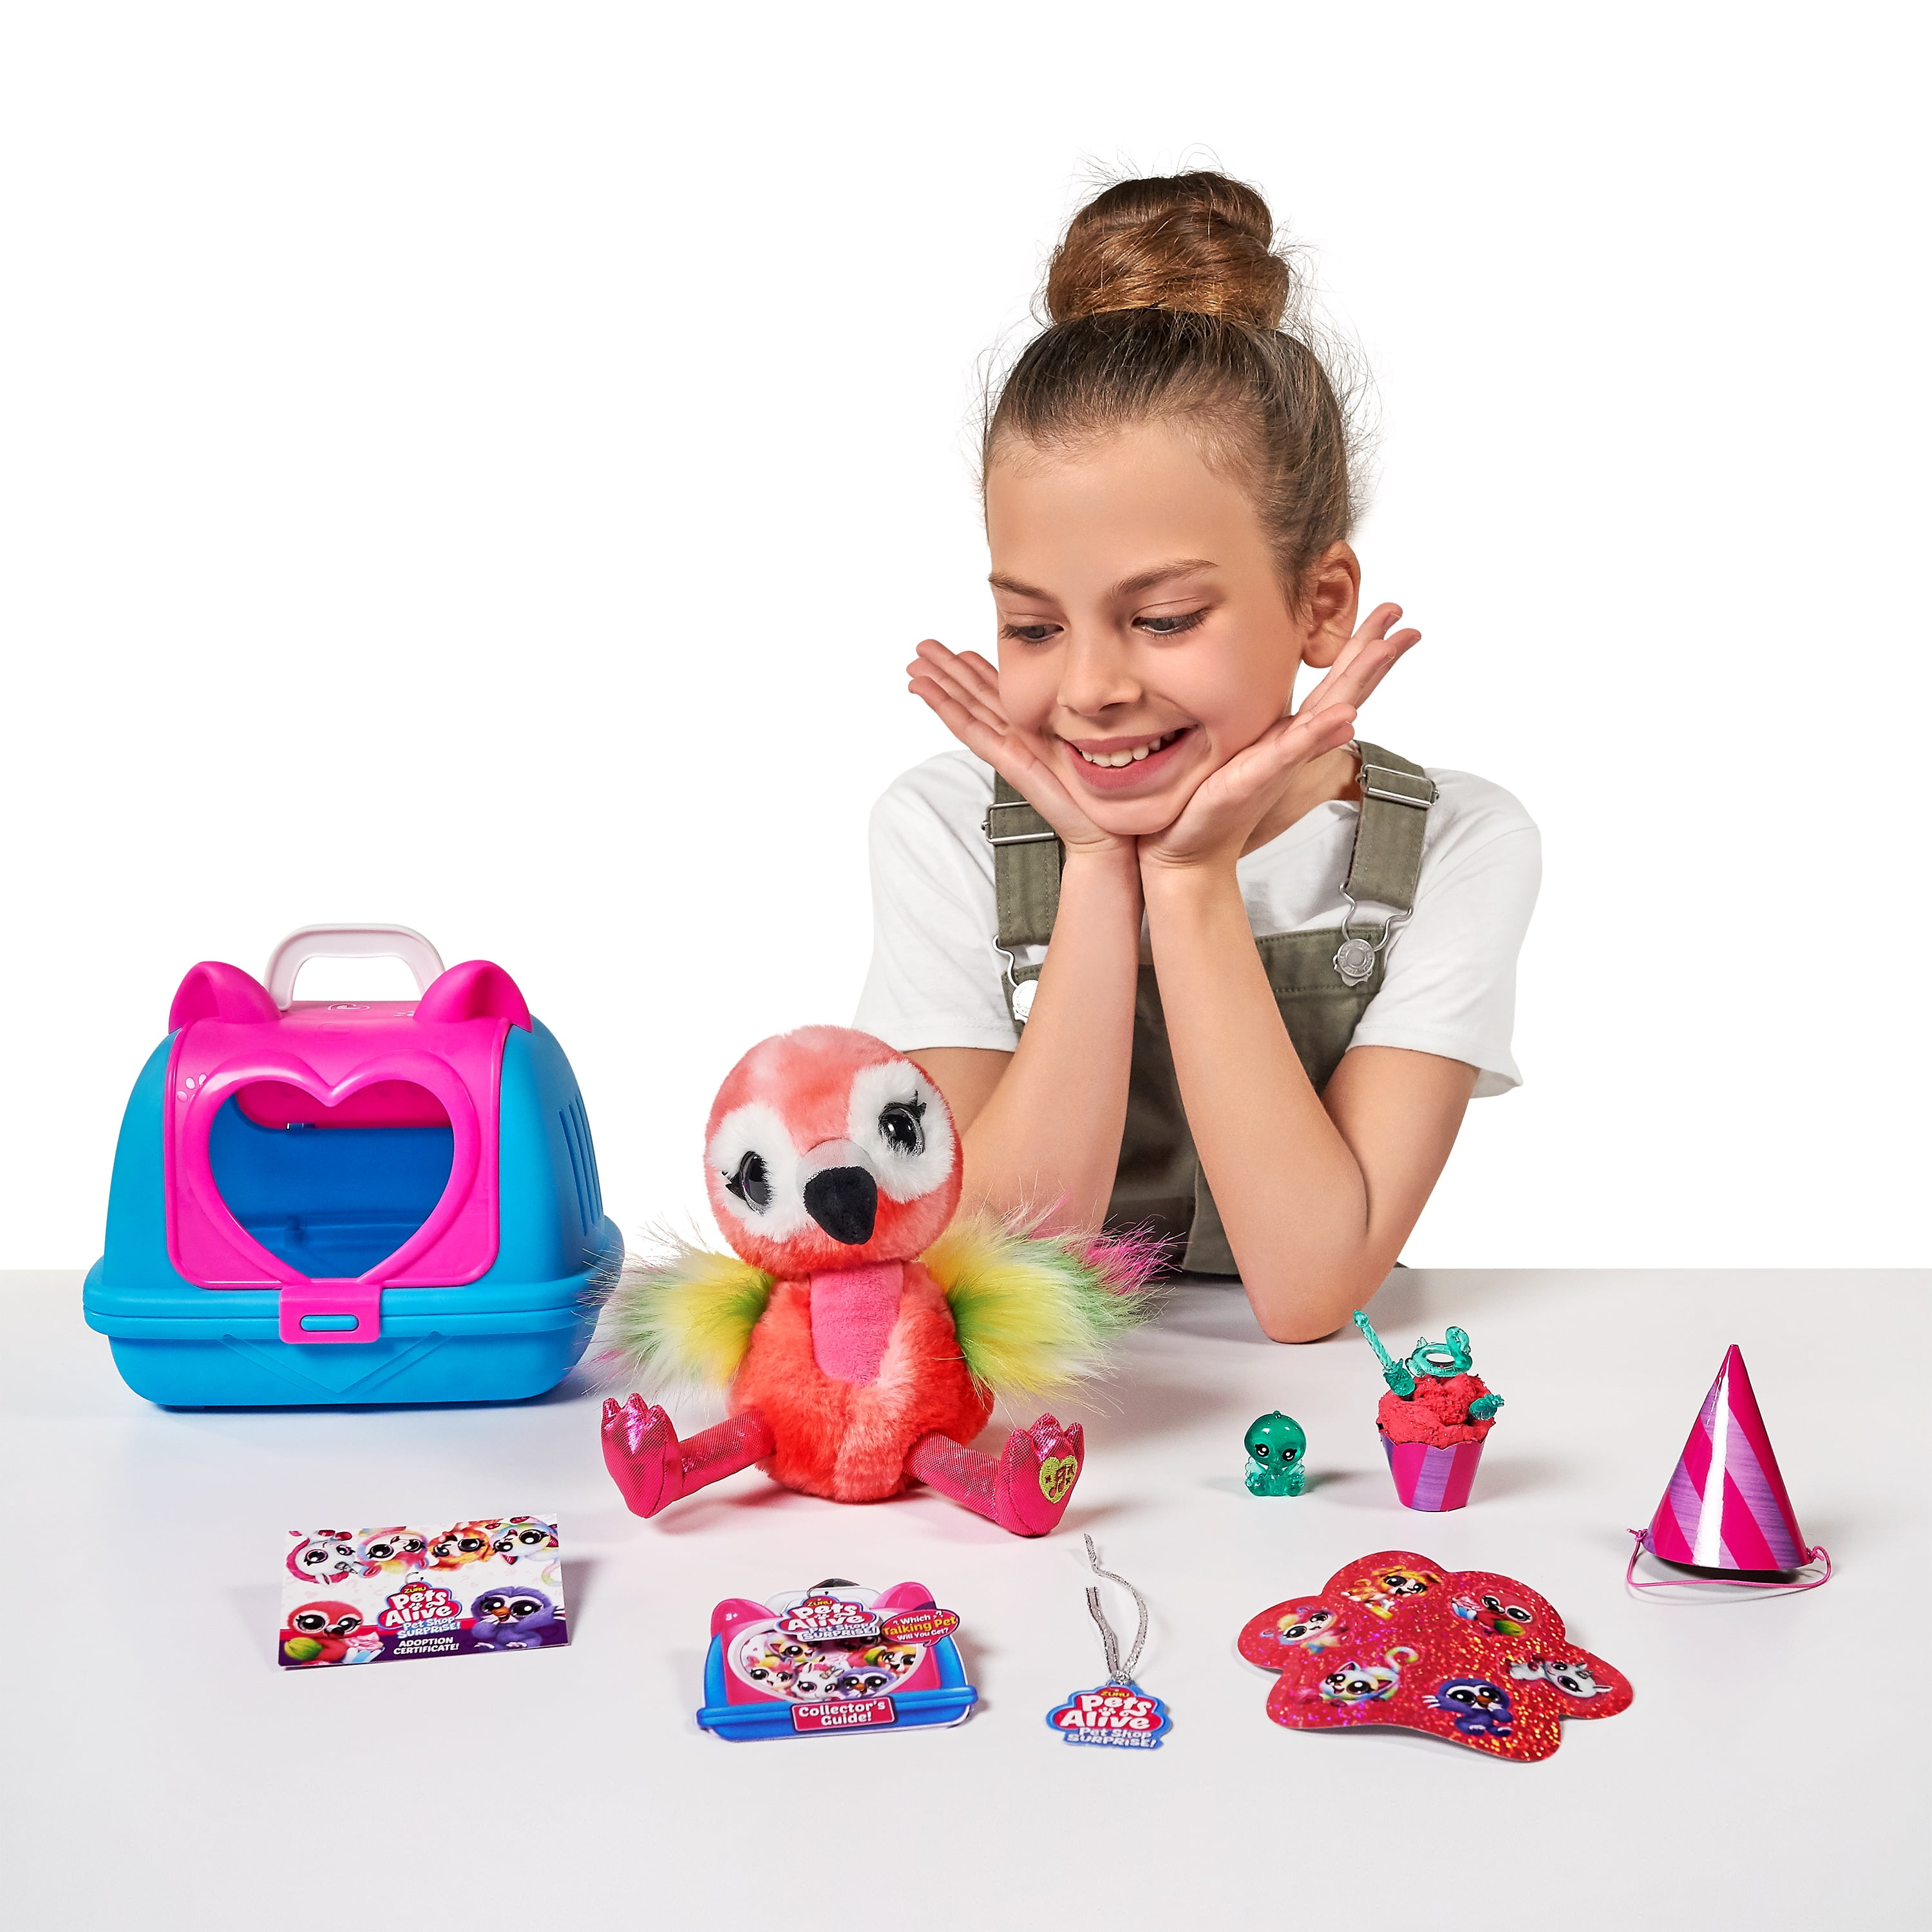 Pets Alive Interactive Electronic Pet Toys for Kids by ZURU - 'Speak &  Repeat' Playset, Animal Surprise Gifts for Girls and Kids (Series 2)